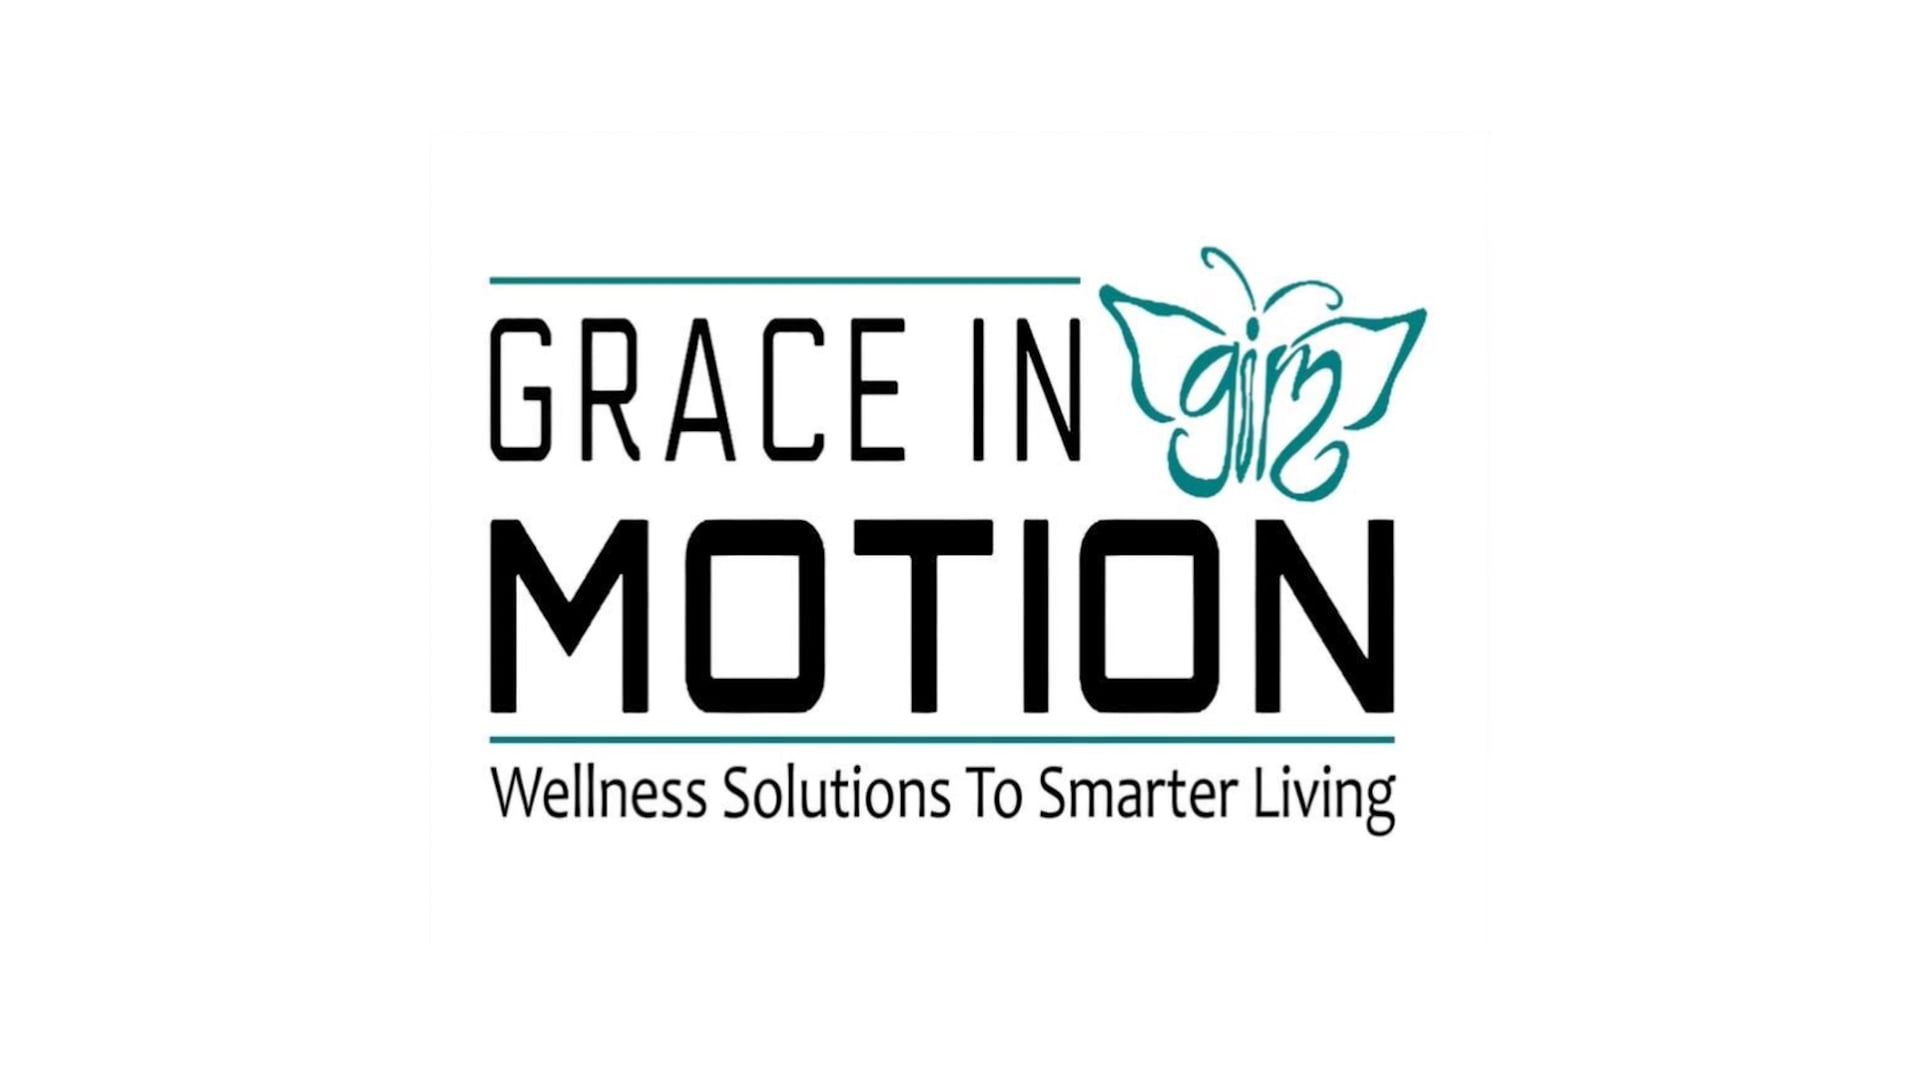 Grace In Motion x The Fiews